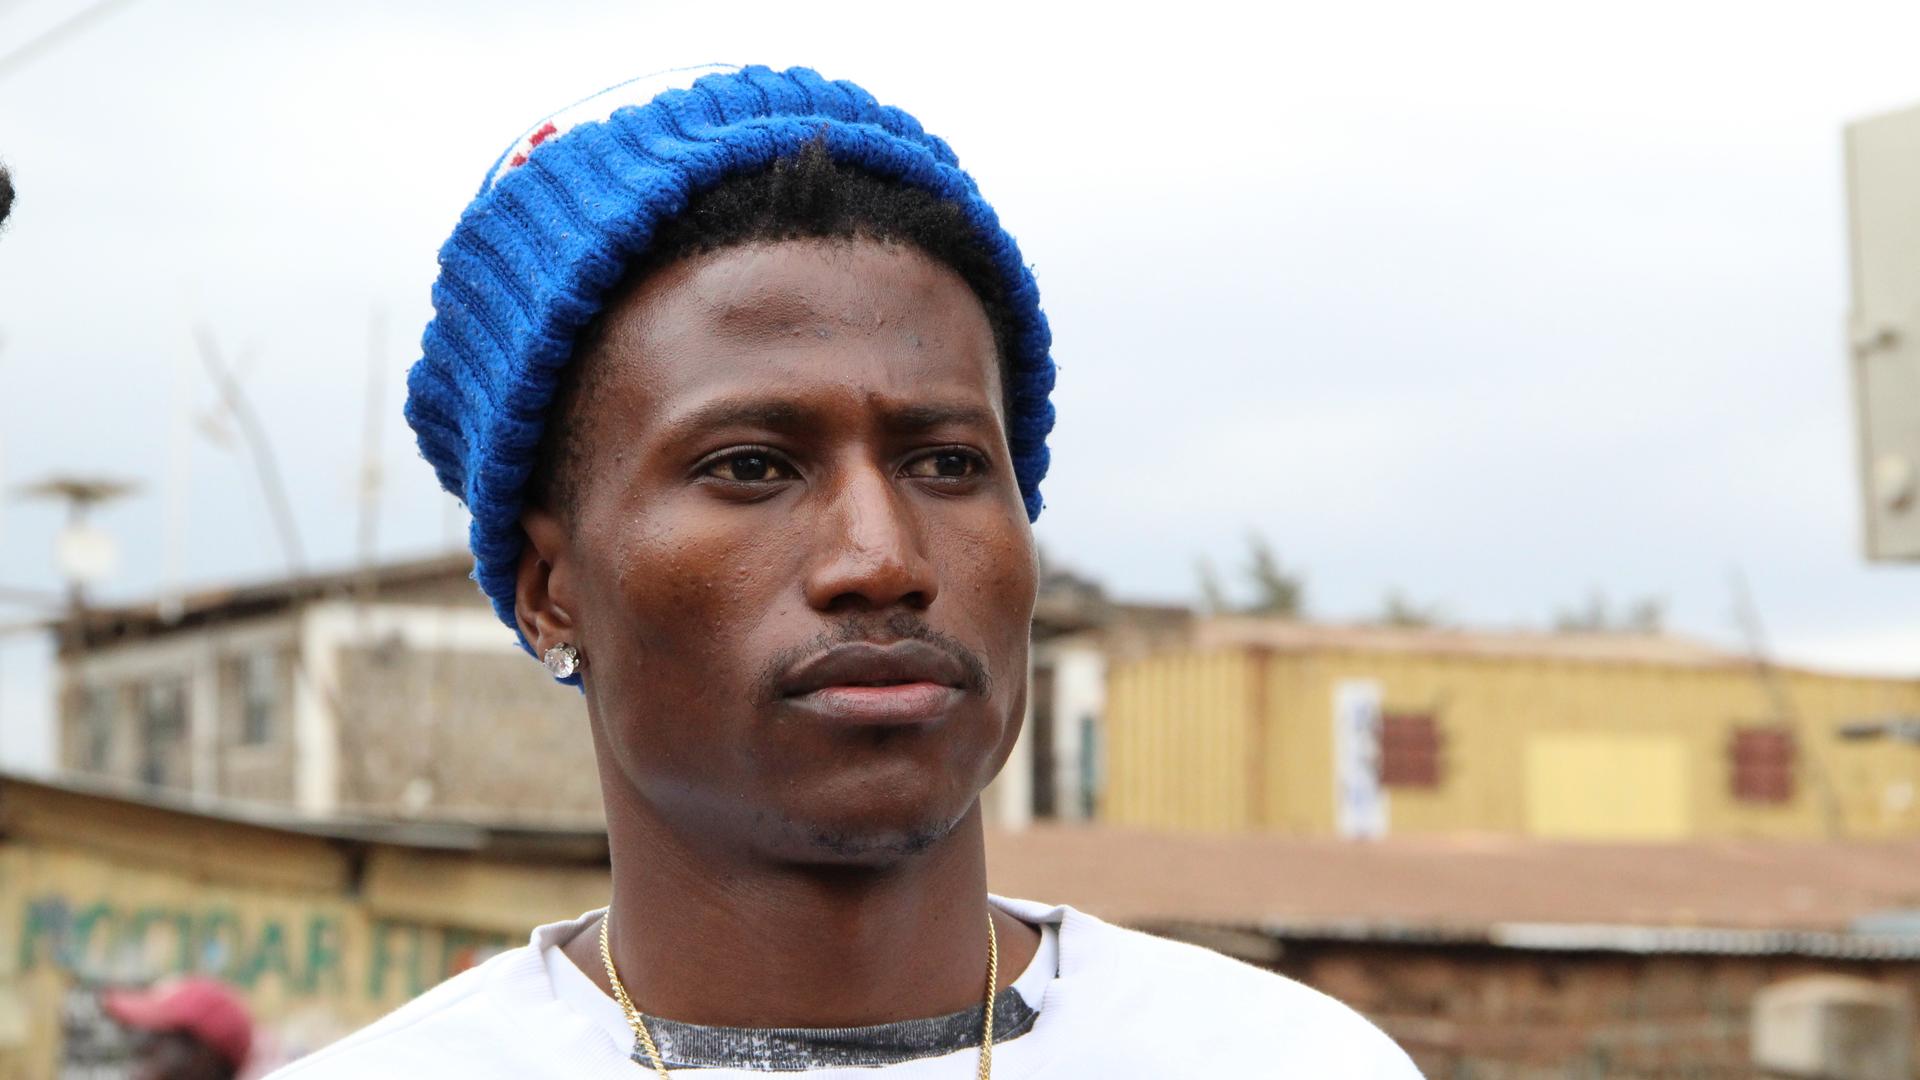 Kenyan rapper Octopizzo grew up in the Kibera slum and still has a house there. He has been speaking out against police violence he witnessed against protestors who congregated in the slum the day after the results of Kenya's election were announced.